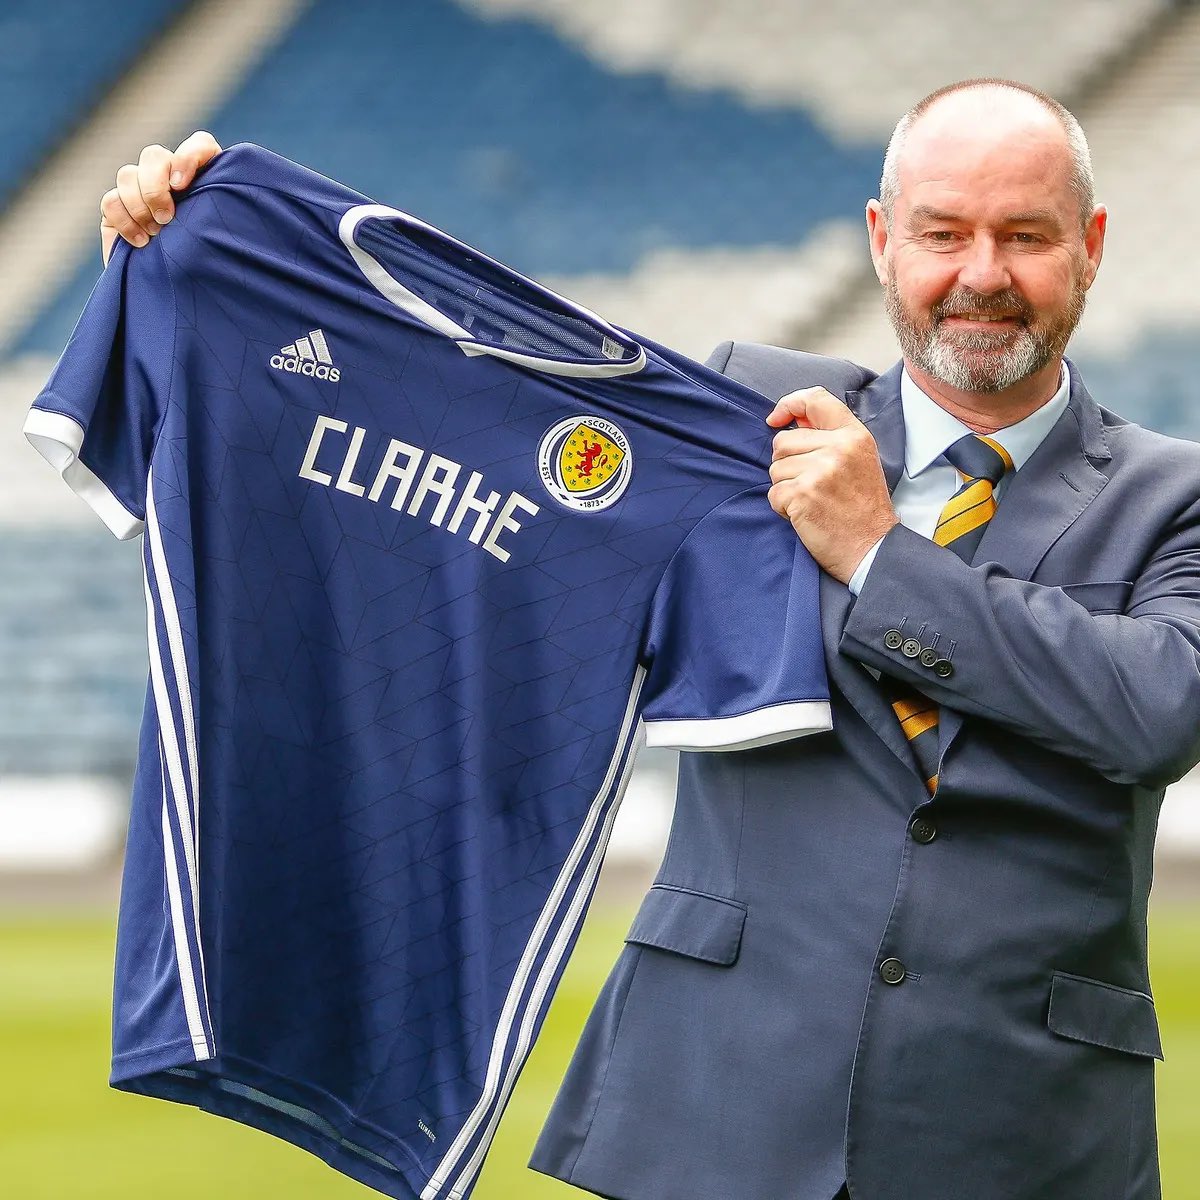 Doubted by so many throughout his tenure, but this guy has once again delivered what has been a rarity over the past few decades. Qualifying for major tournaments has become quite the occurrence in the Steve Clarke era, build this guy a statue IMMEDIATELY! 🏴󠁧󠁢󠁳󠁣󠁴󠁿👑